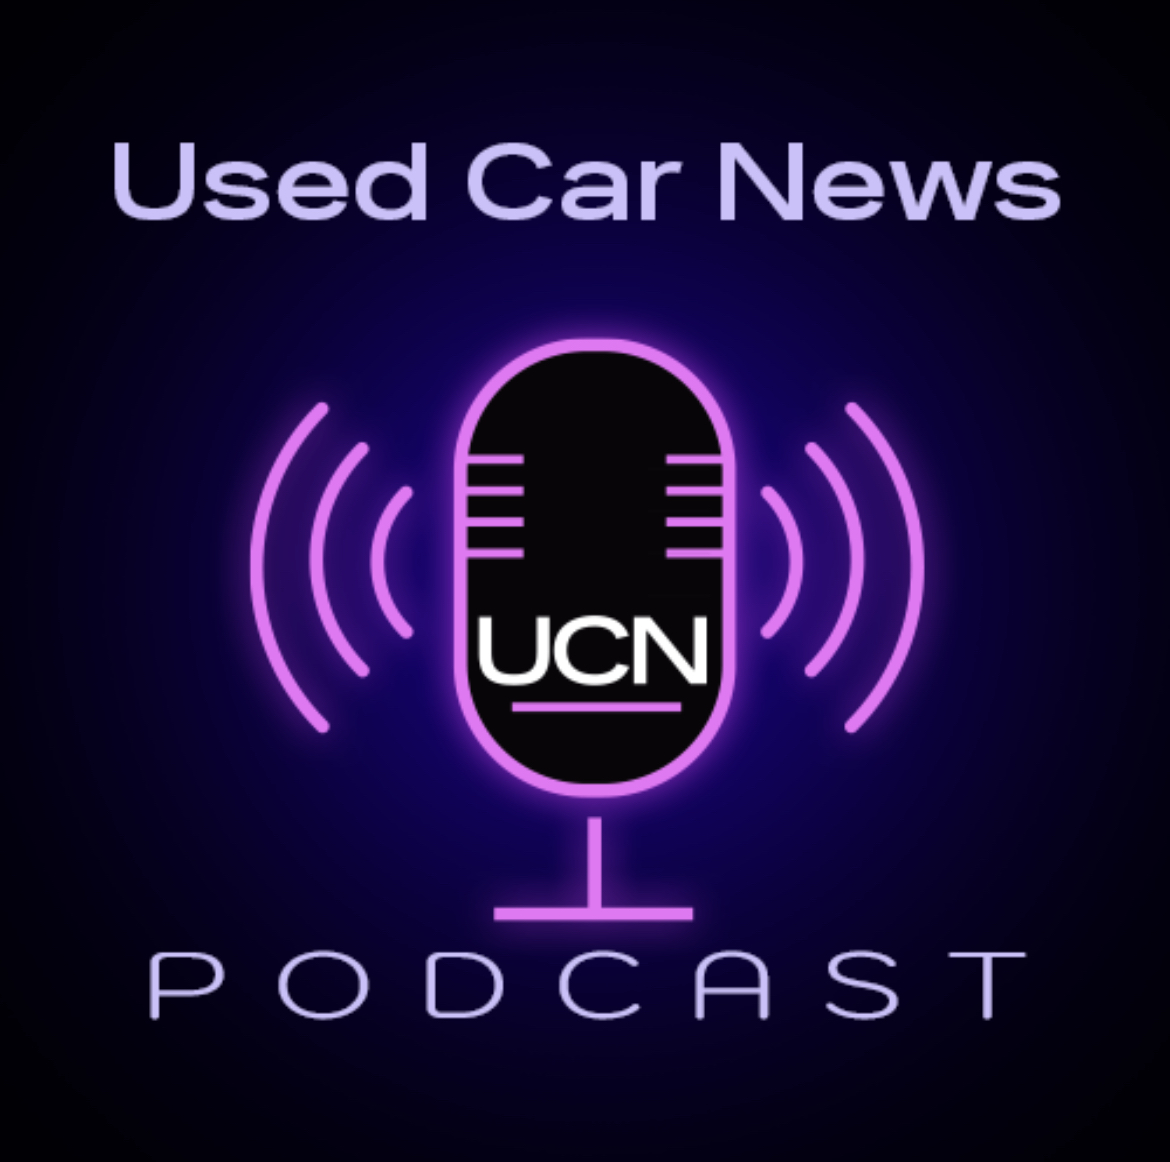 Used Car News Interview With Penny Wanna